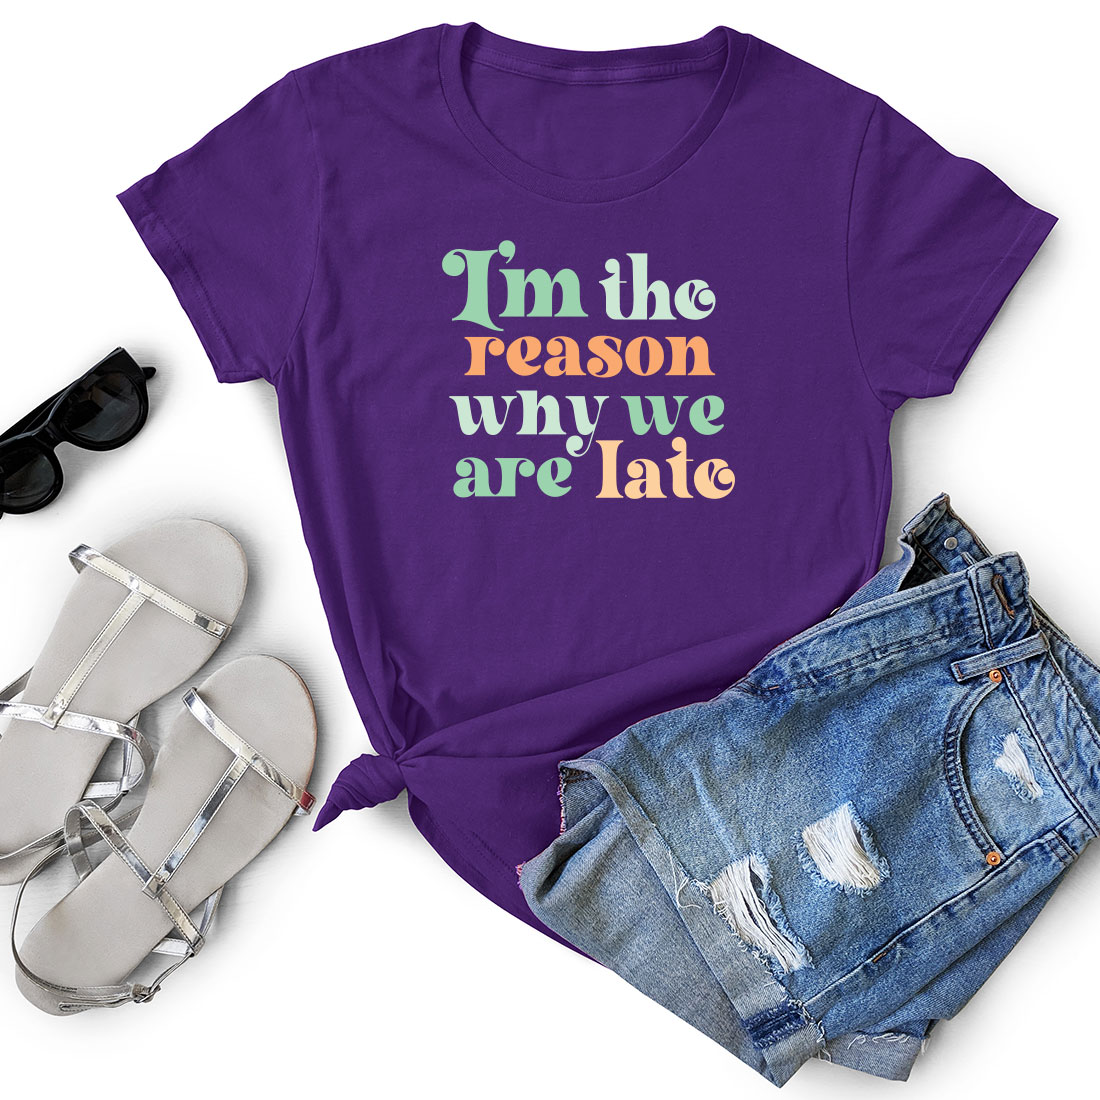 T - shirt that says i'm the reason why we are late next.